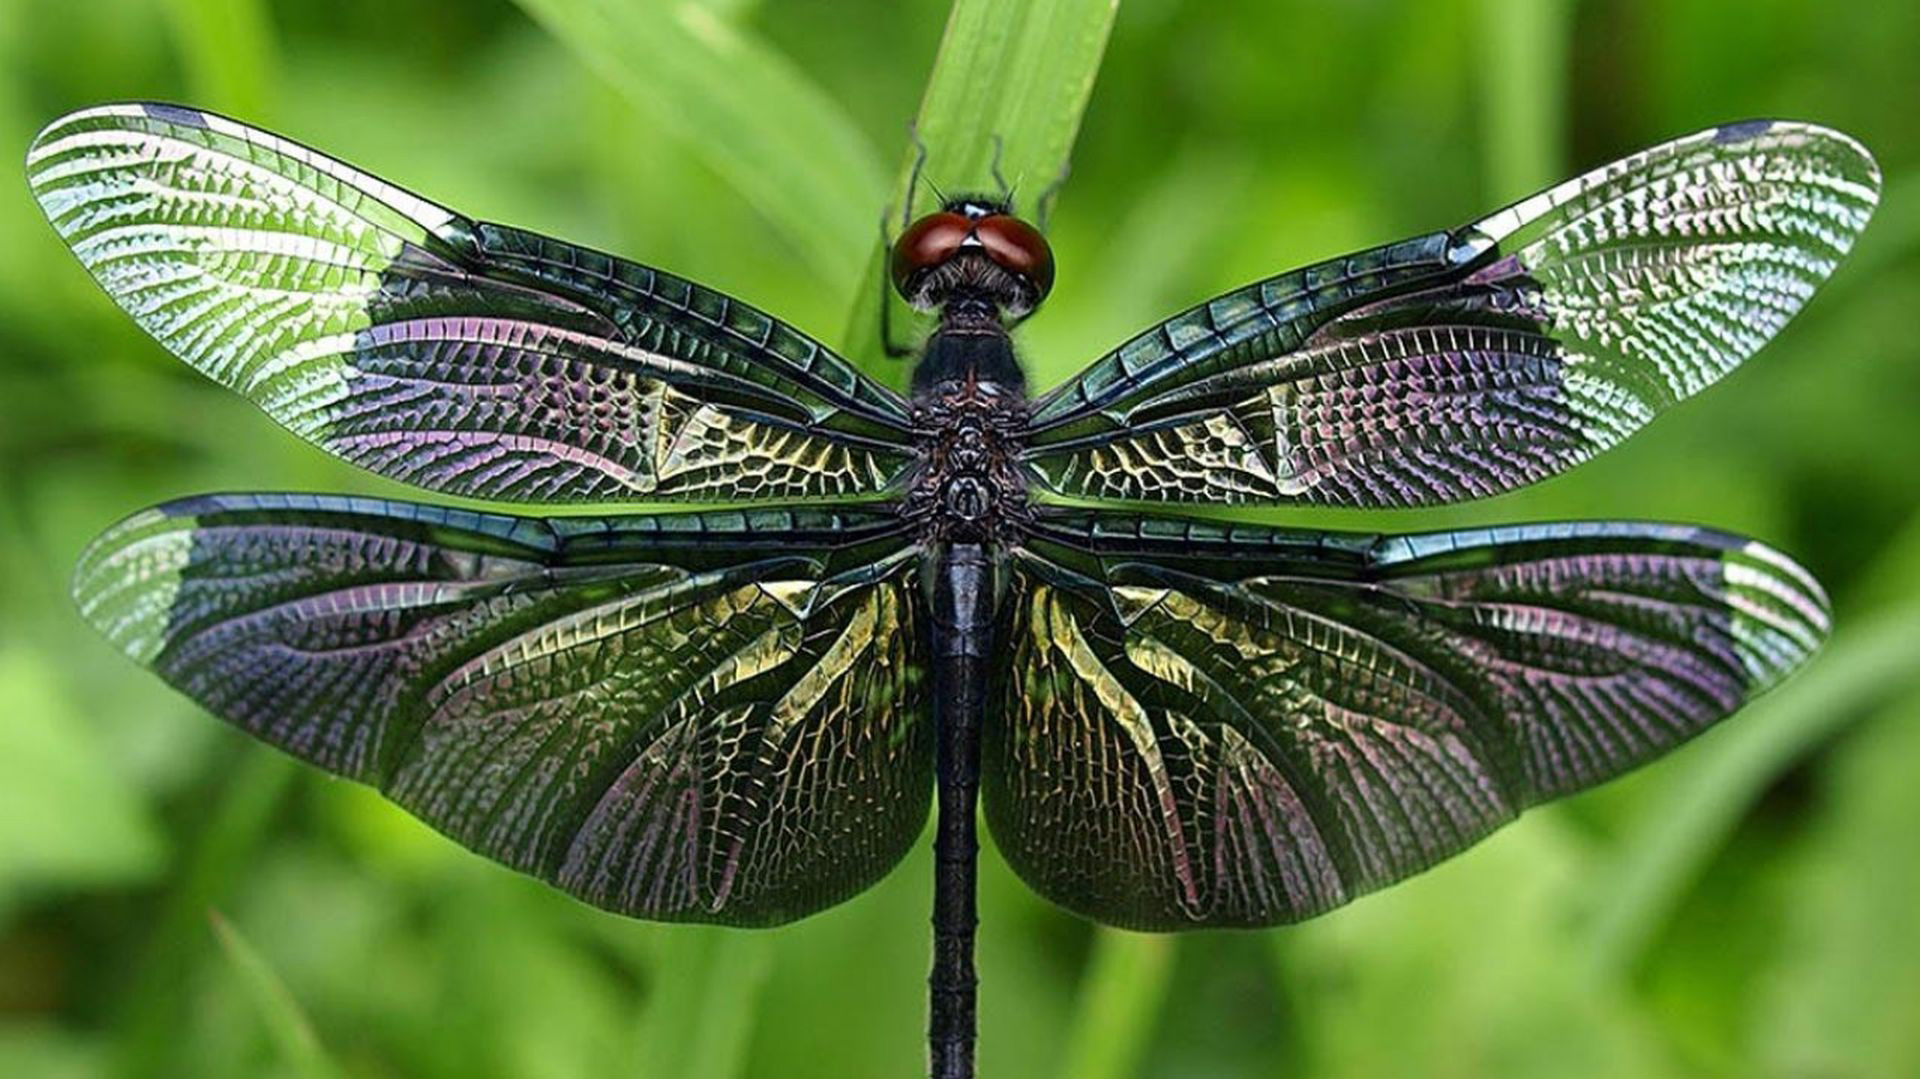 DragonfLy Screensavers and Wallpaper 43 images